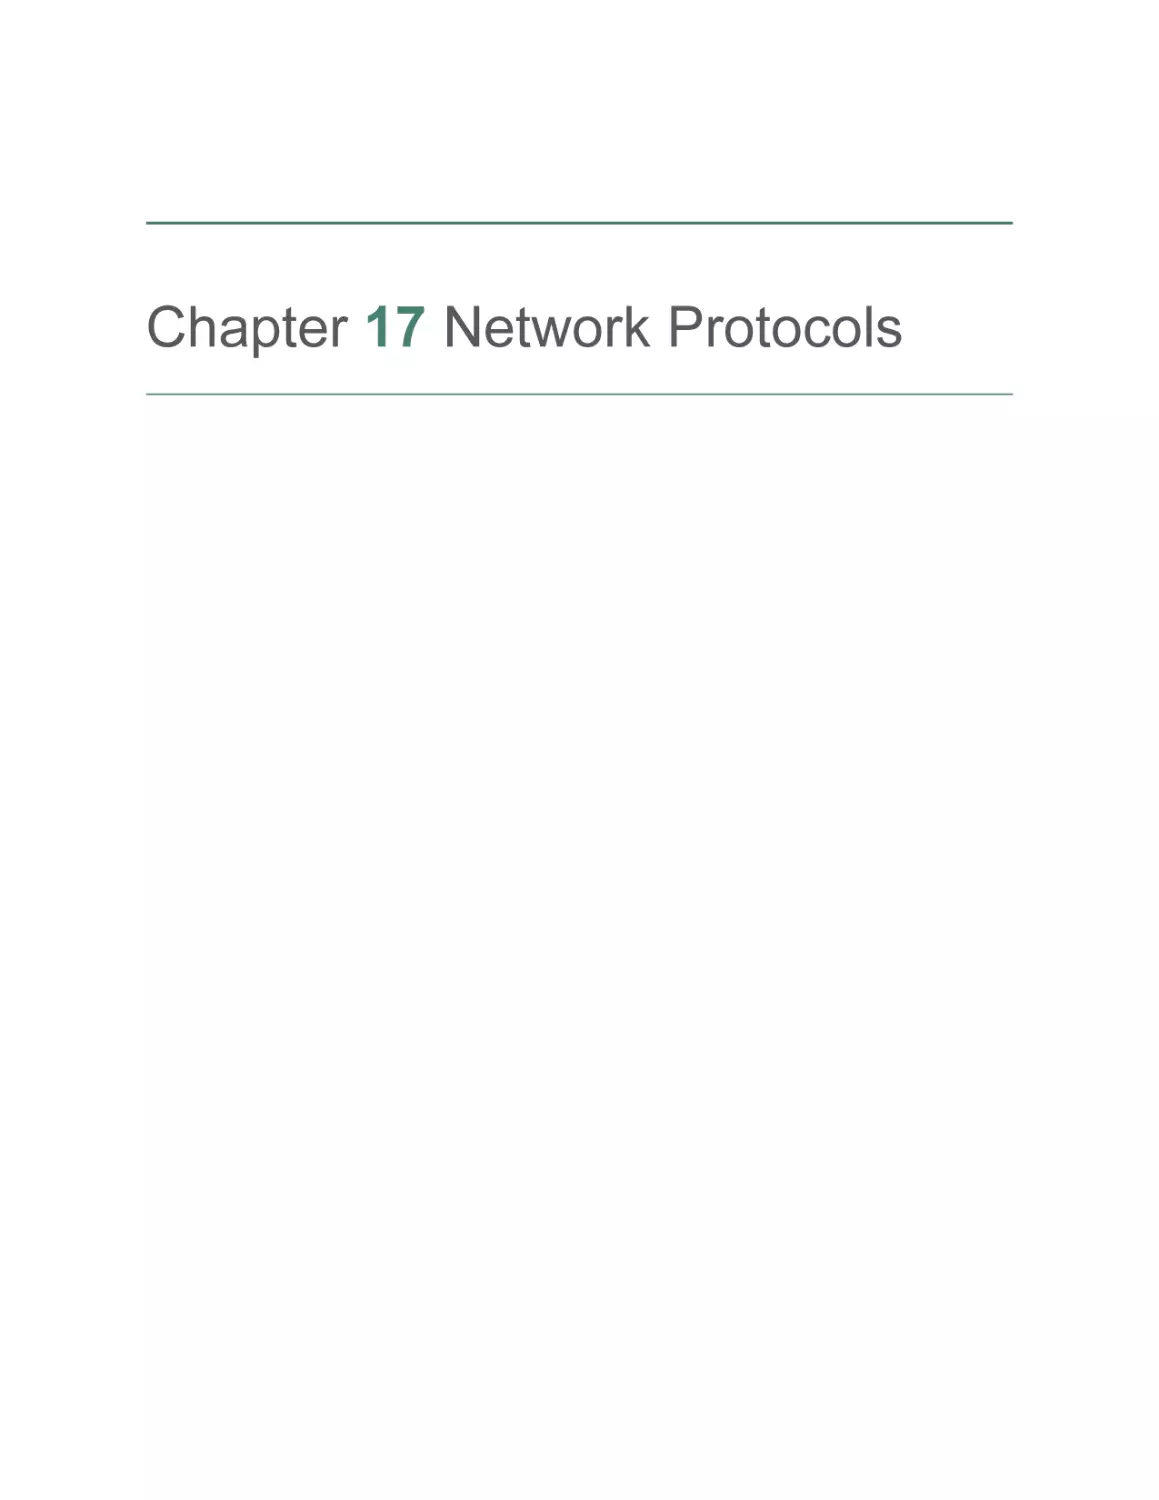 Chapter 17 Network Protocols